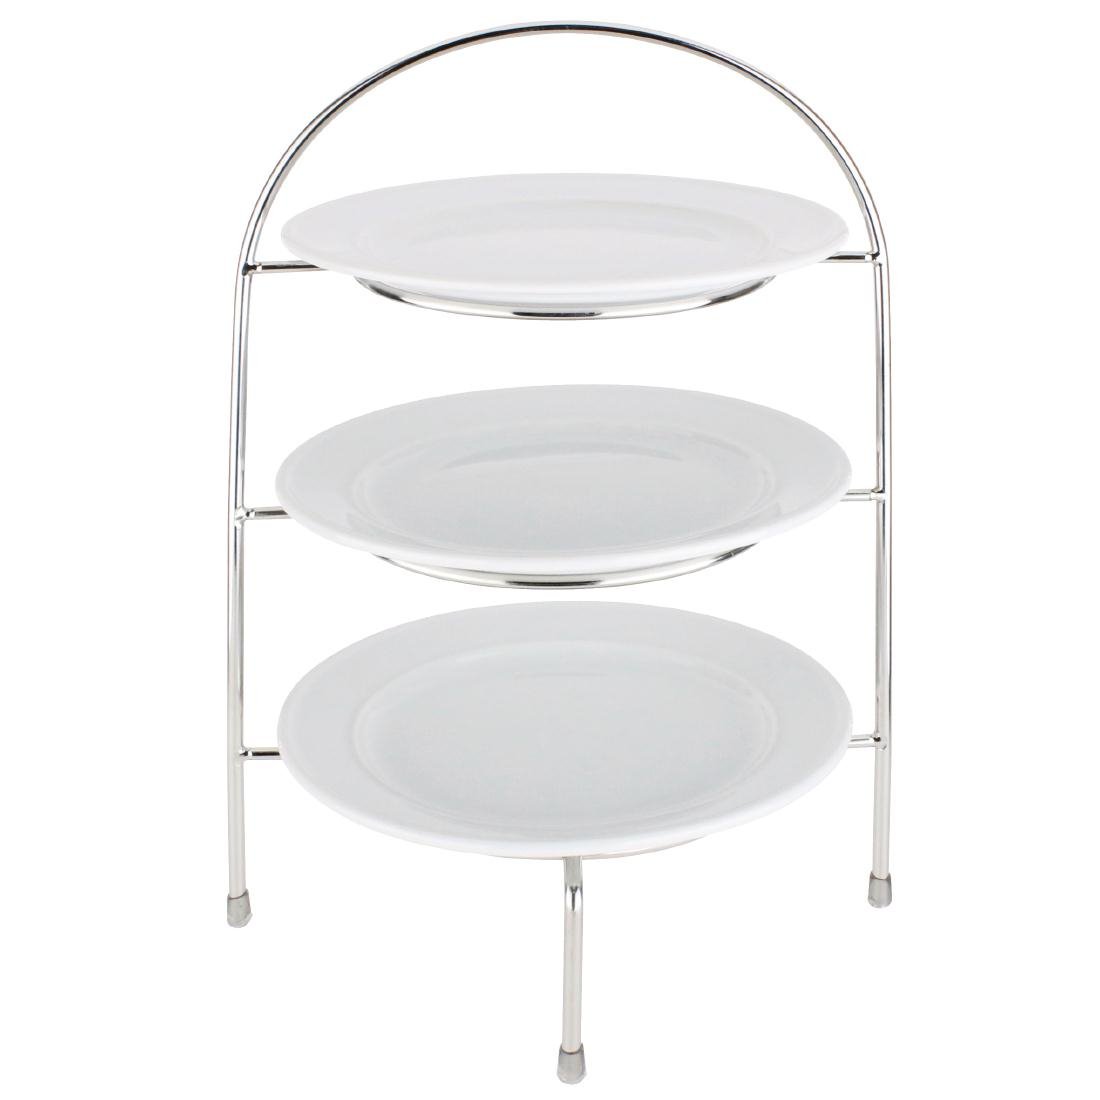 Afternoon Tea Stand For Plates Up To 267mm By Olympia Cl572 Smart Hospitality Supplies